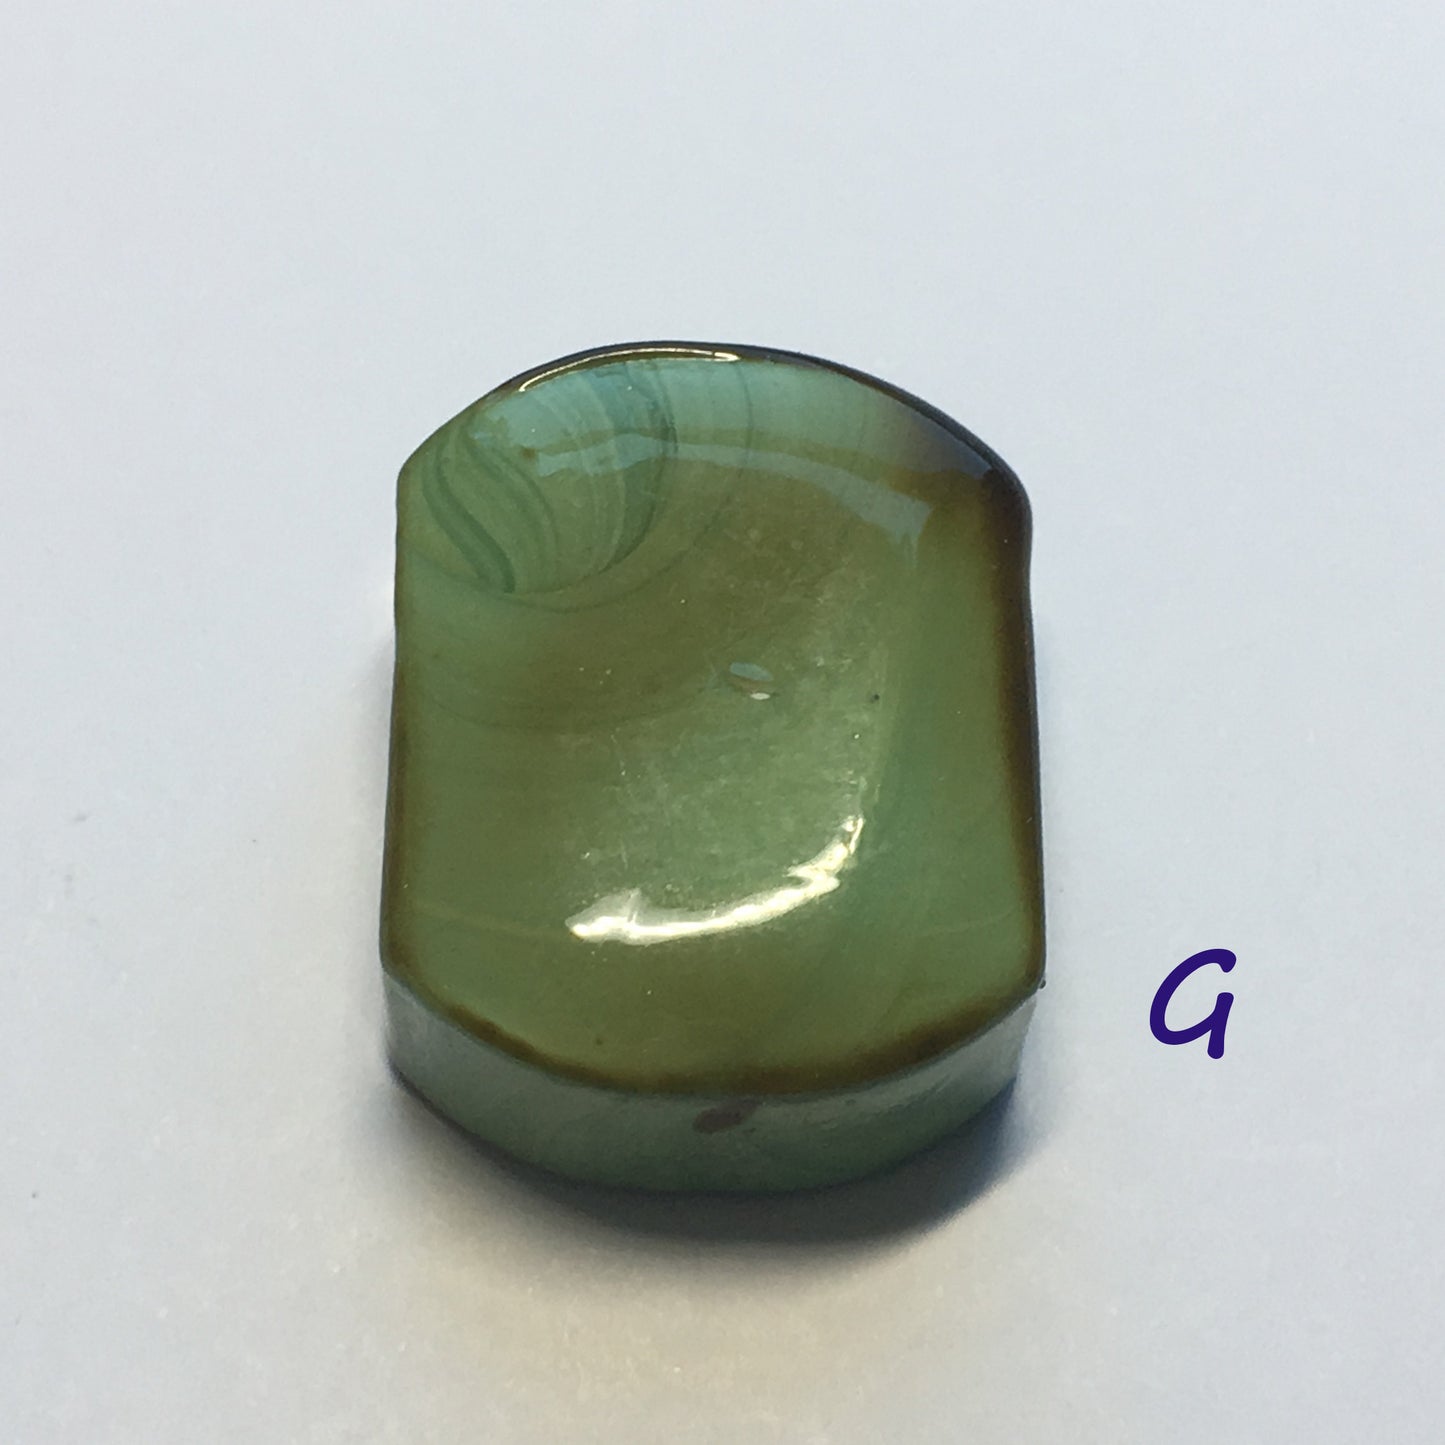 Glass Focal Bead, Two-Strand, 19 x 24 x 10 mm, Bead G